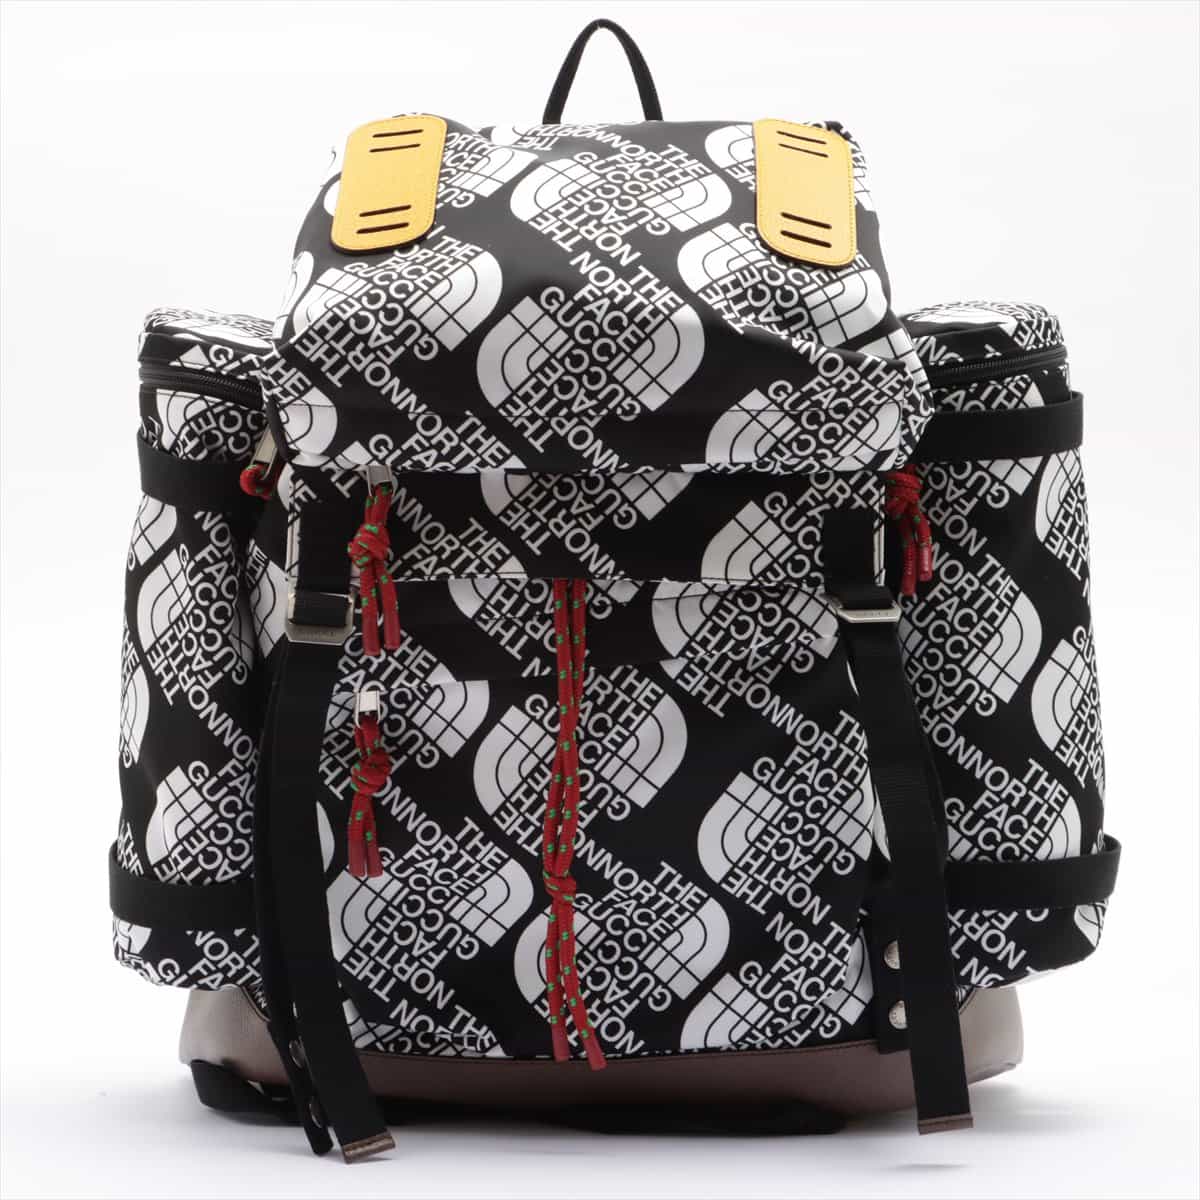 Gucci x North Face Nylon & Leather Backpack Black × White 650294